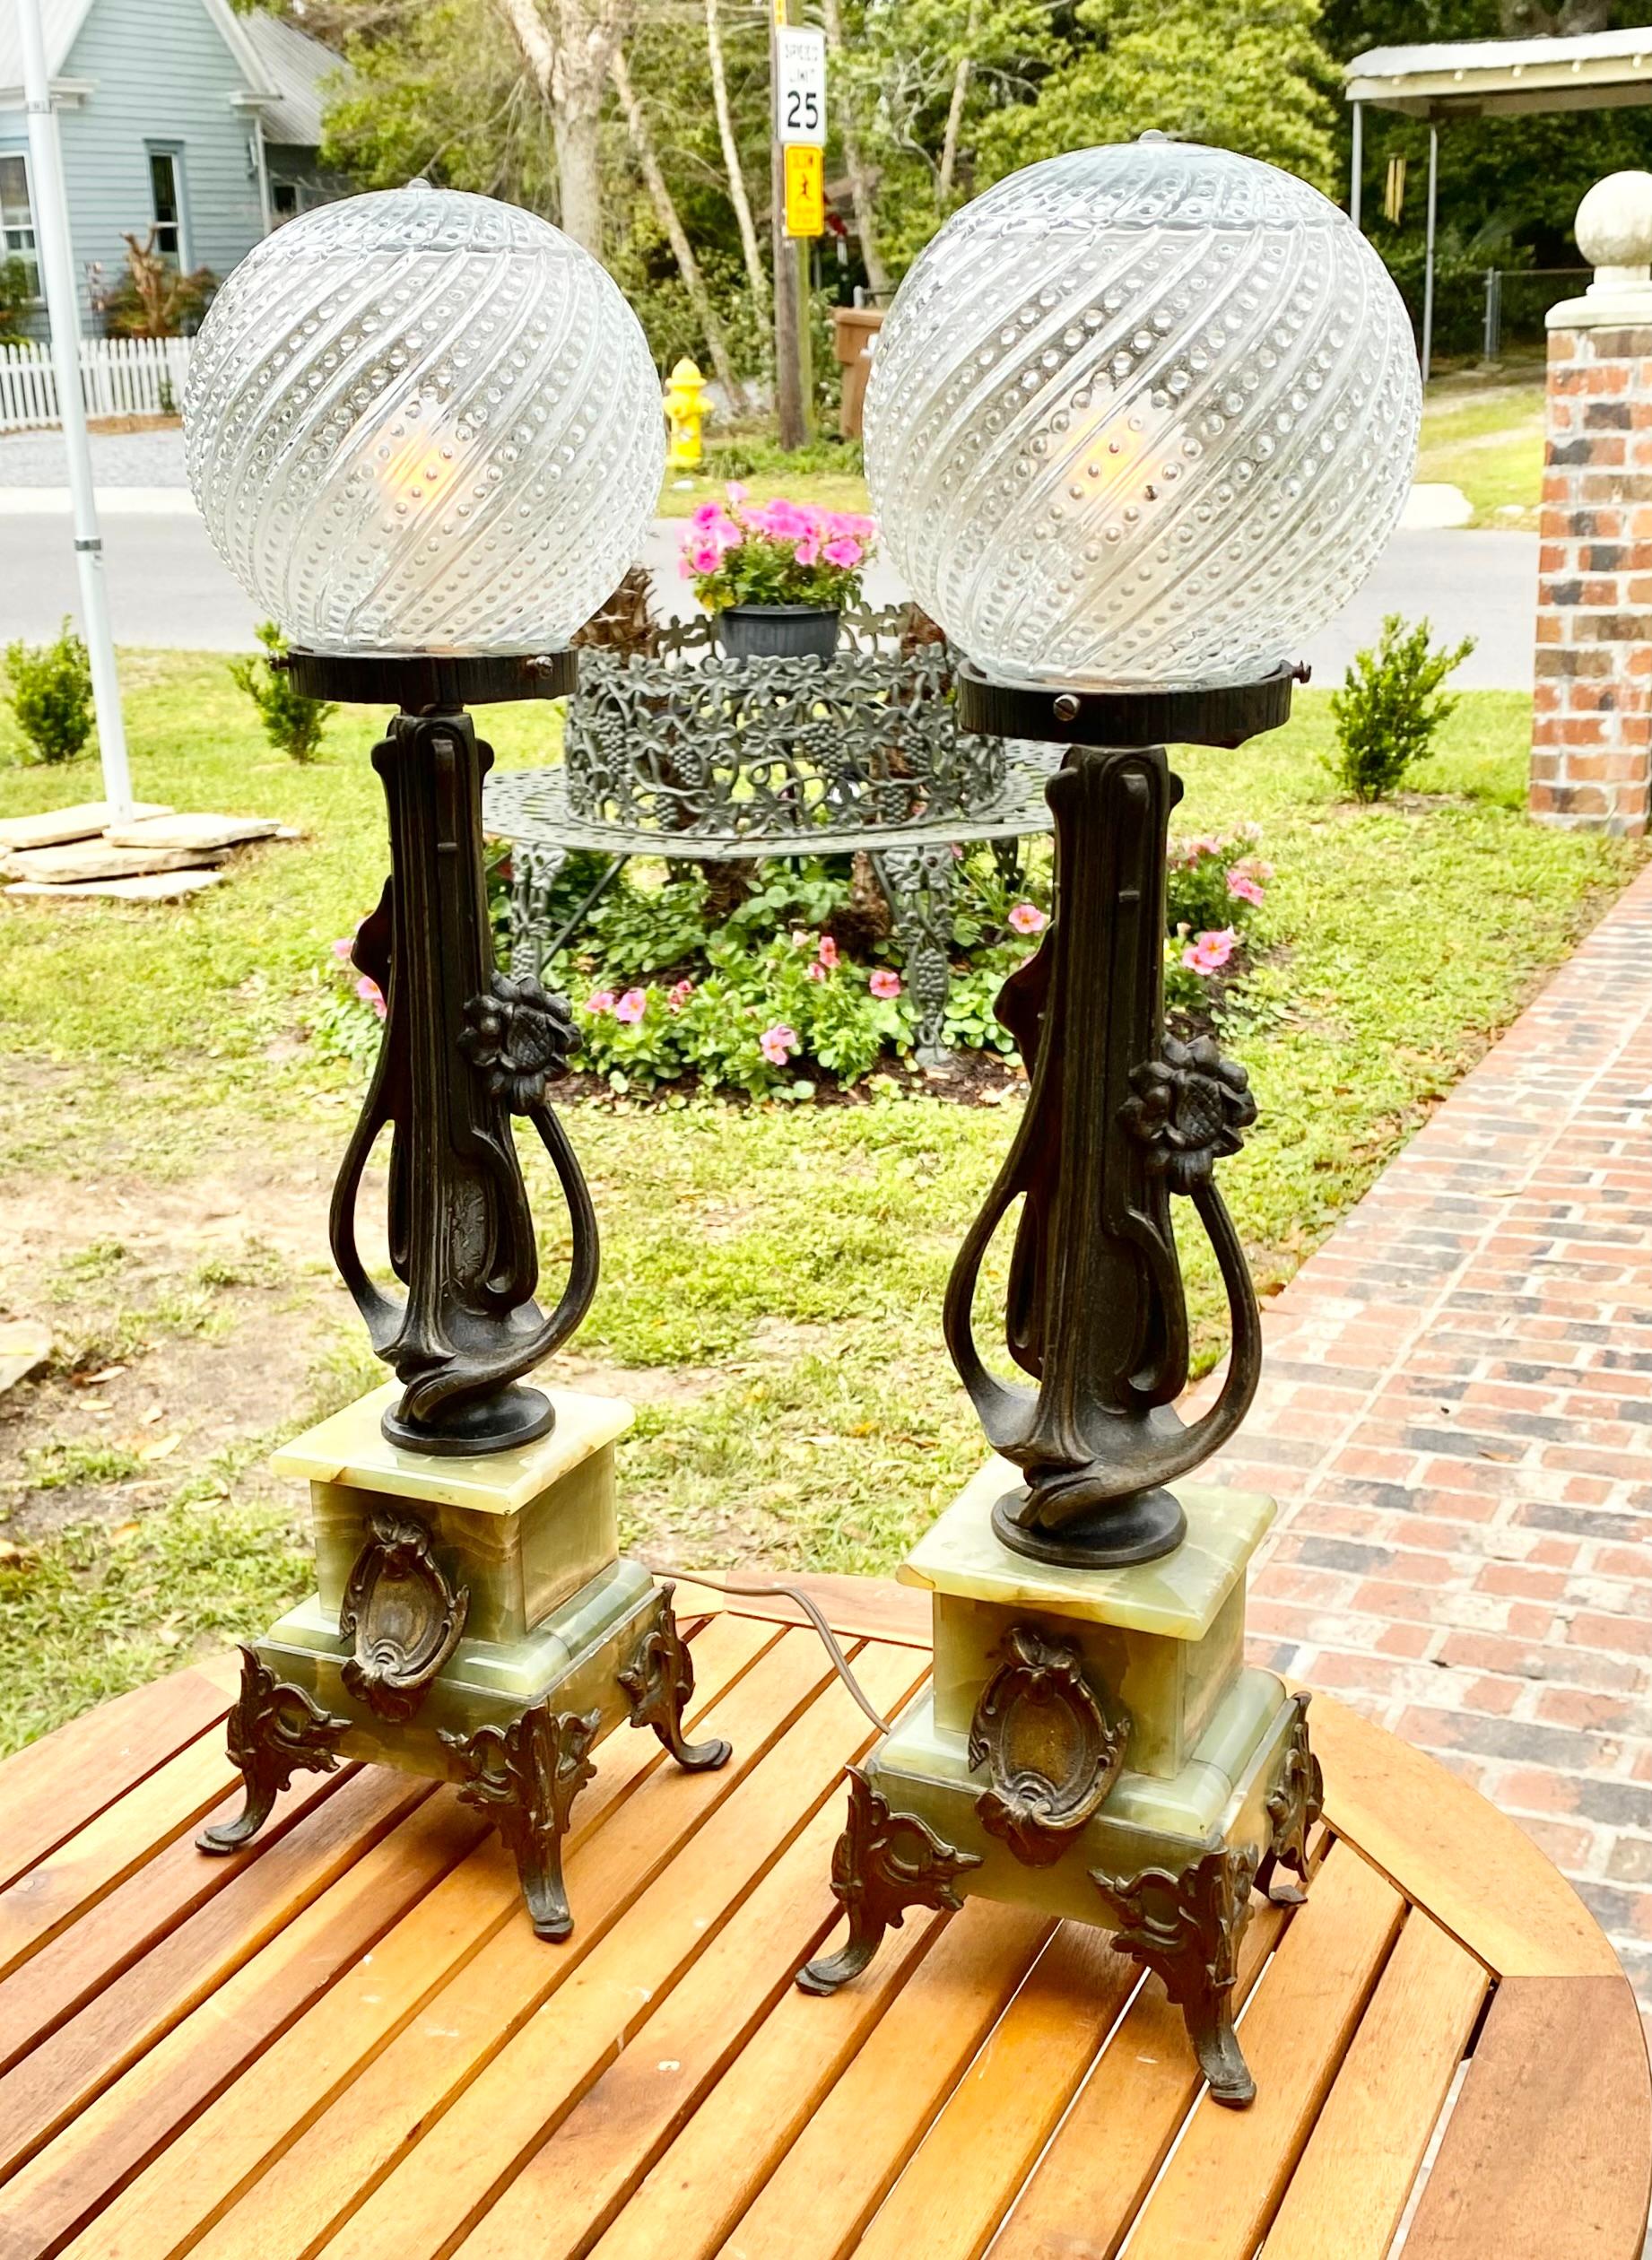 Pair Of French Art Nouveau Patinated Spelter And Onyx Table Lamps, 19th C., having been oil lamps at one time, with round blown glass hobnail shades on a spelter art nouveau support, and a stepped green onyx base, on splayed spelter feet,
A perfect